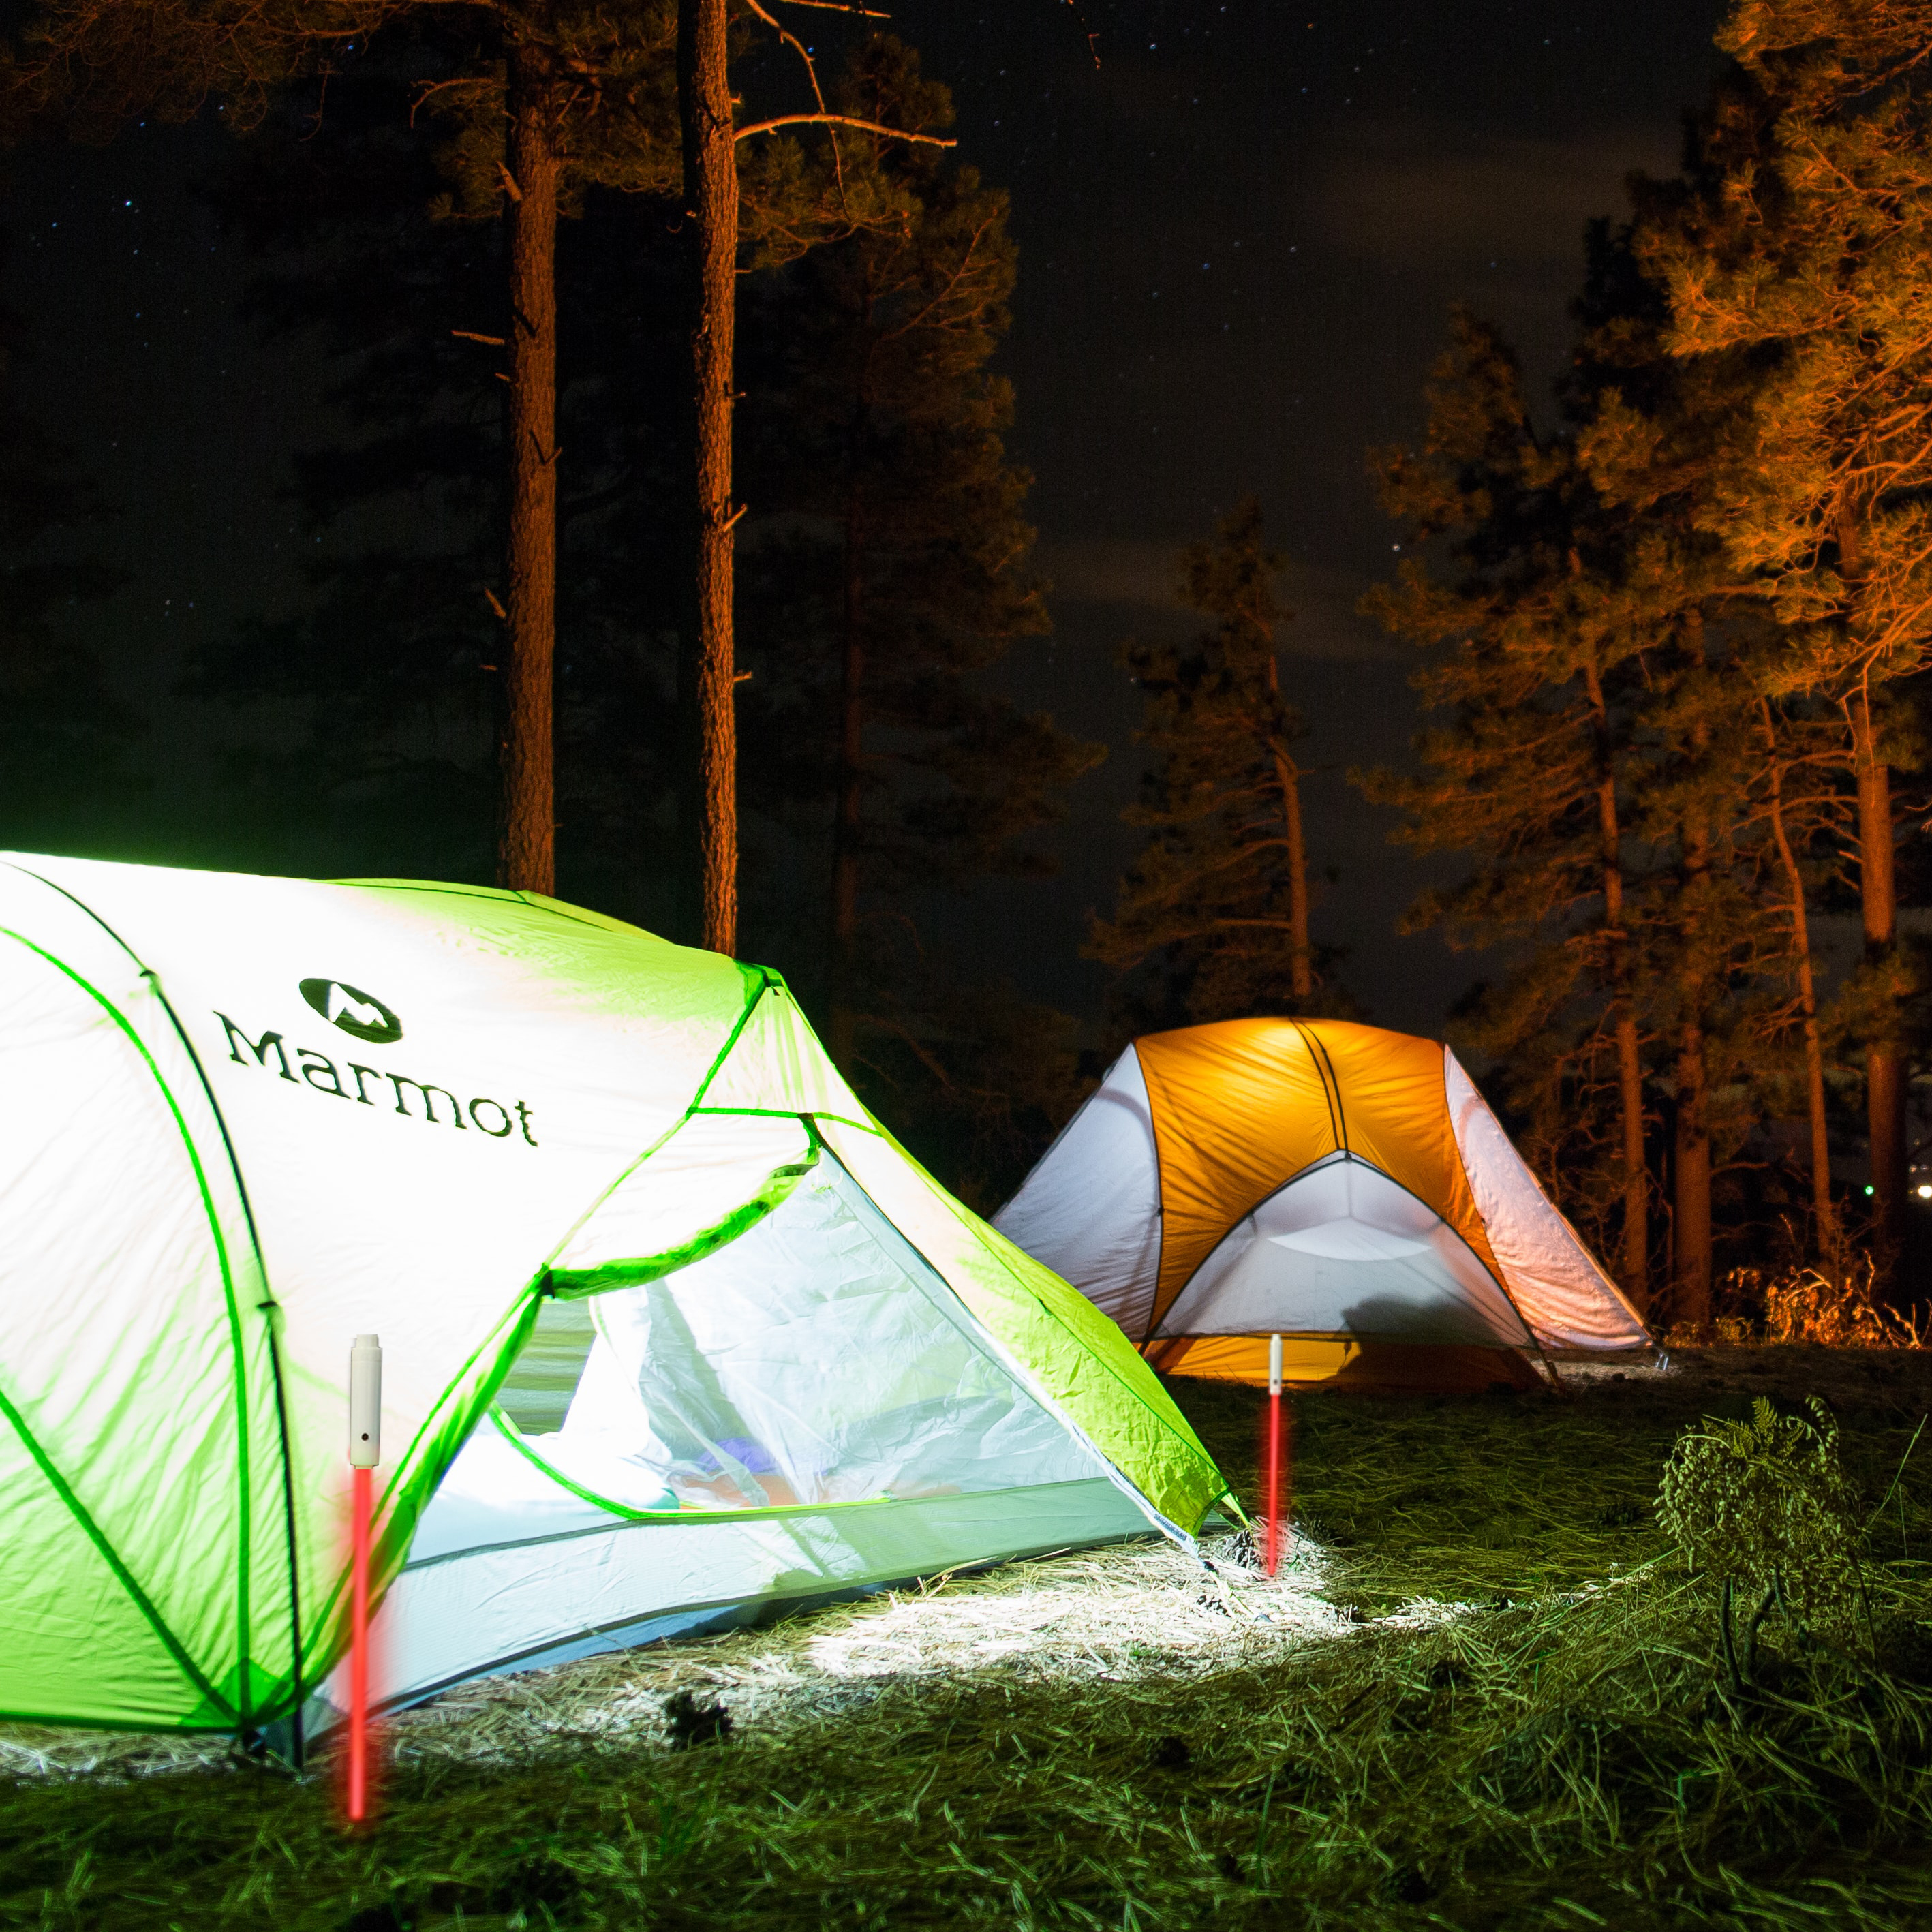 How to make your camping trip fun and bright!